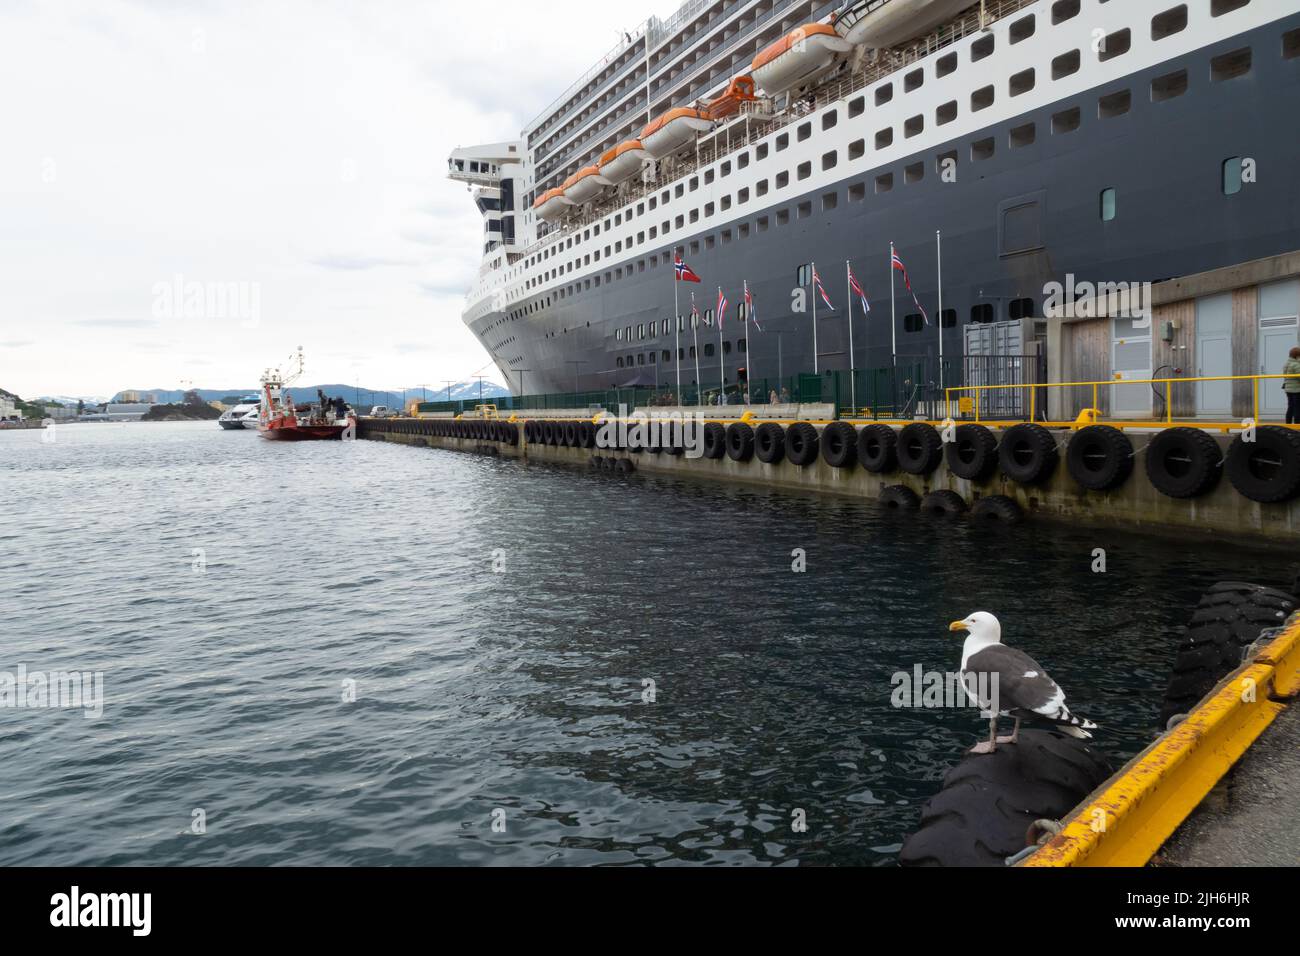 The Cunard Line Queen Mary 2 cruise ship is docked in the port of Alesund, Norway. Stock Photo